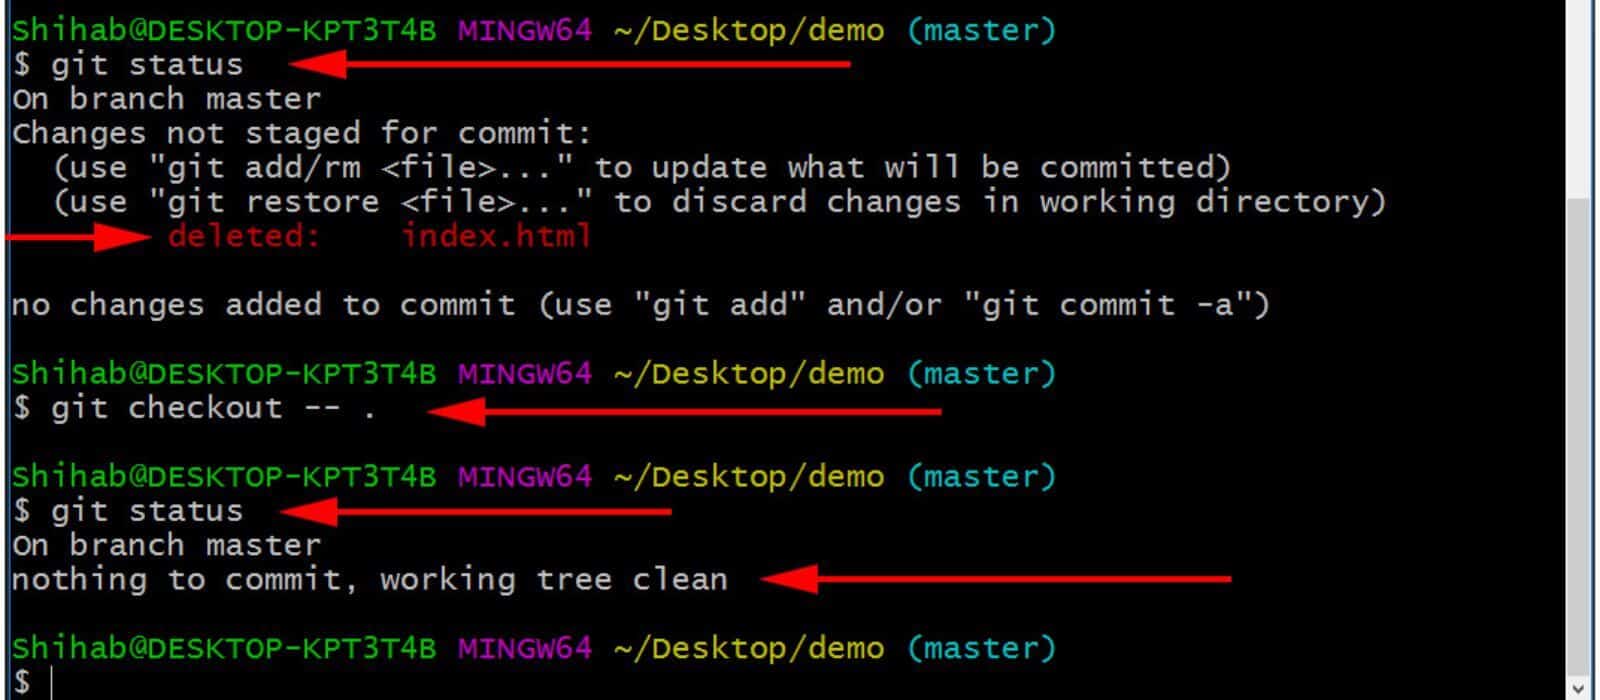 Restored deleted project using Git command